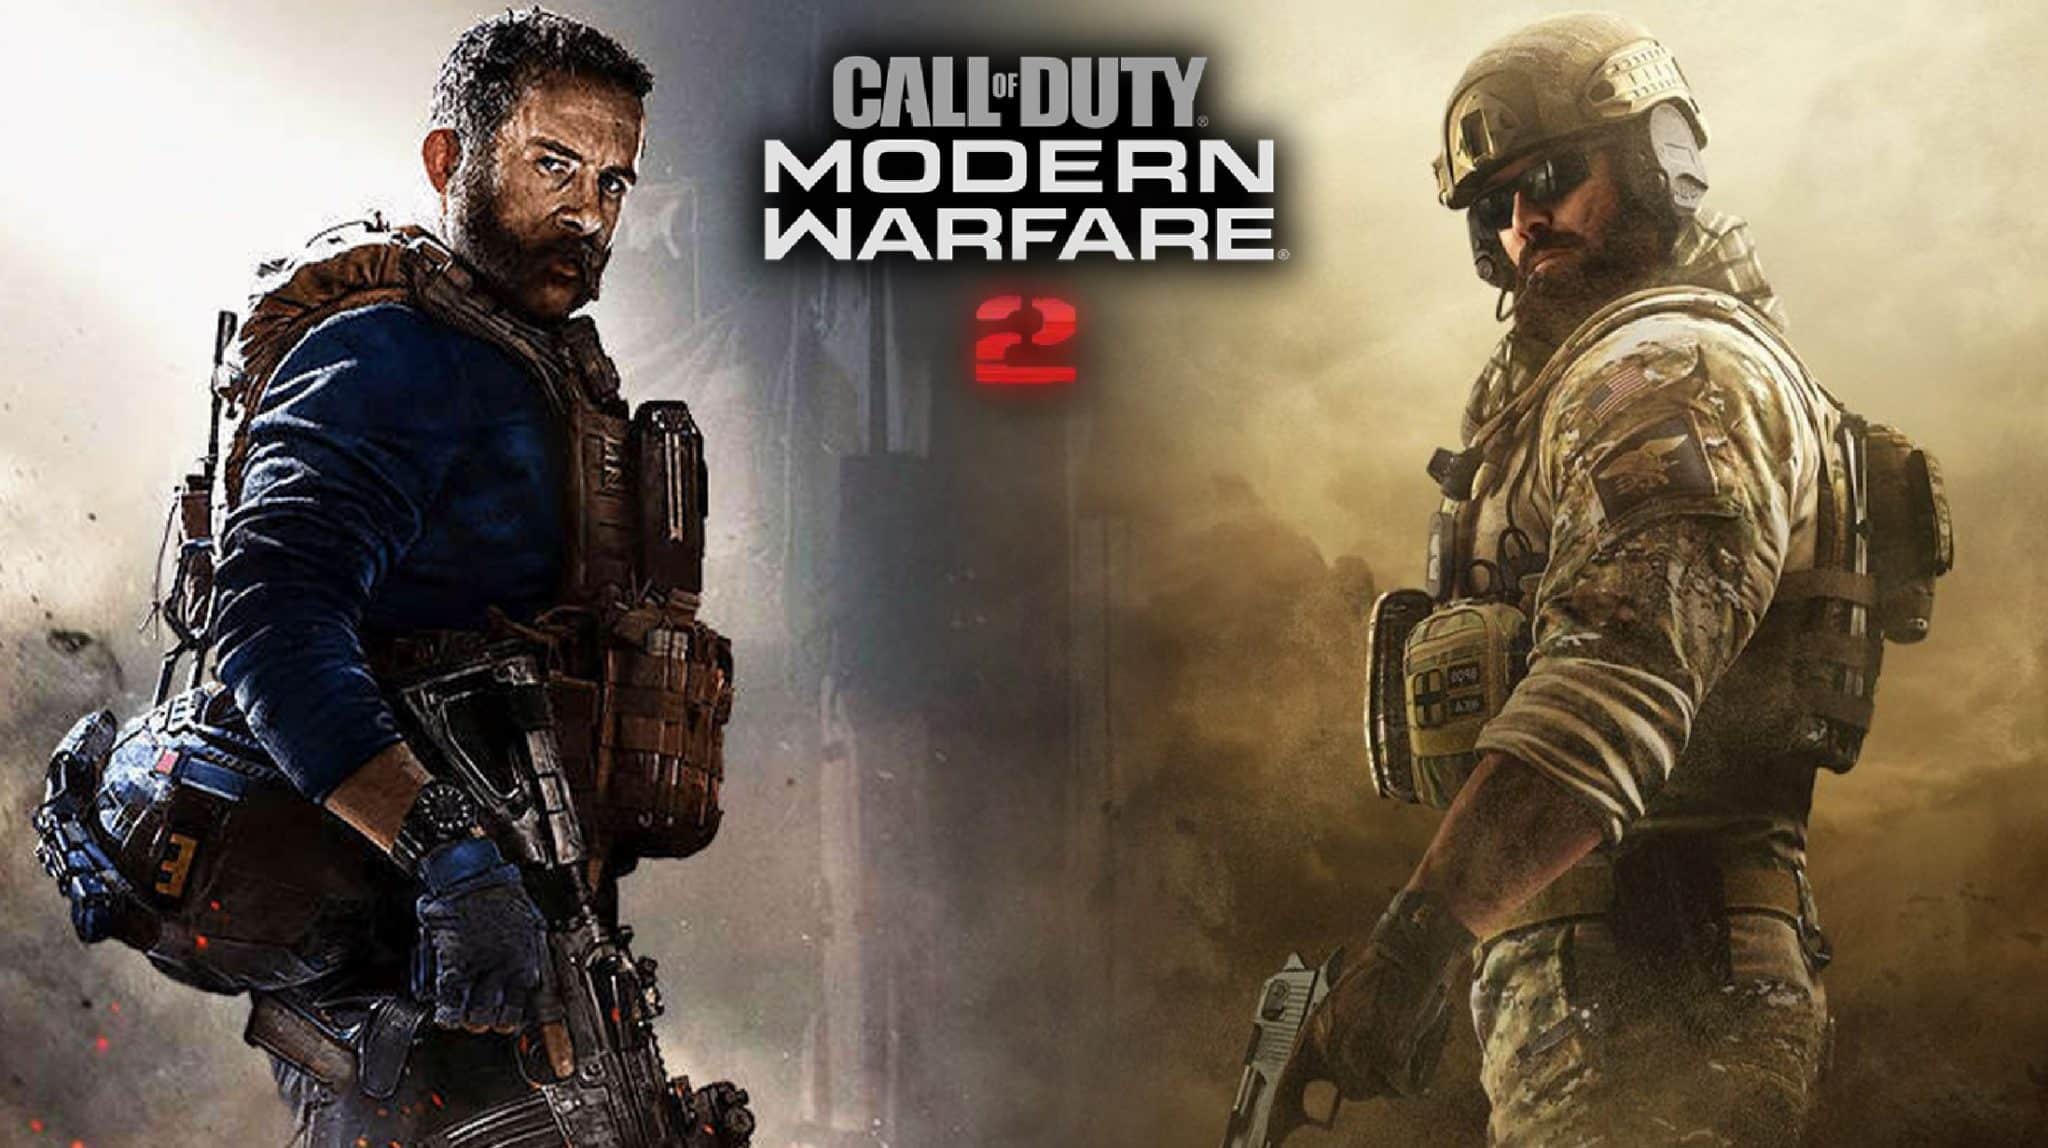 Either Call of Duty: Modern Warfare 2 is coming to Steam, or